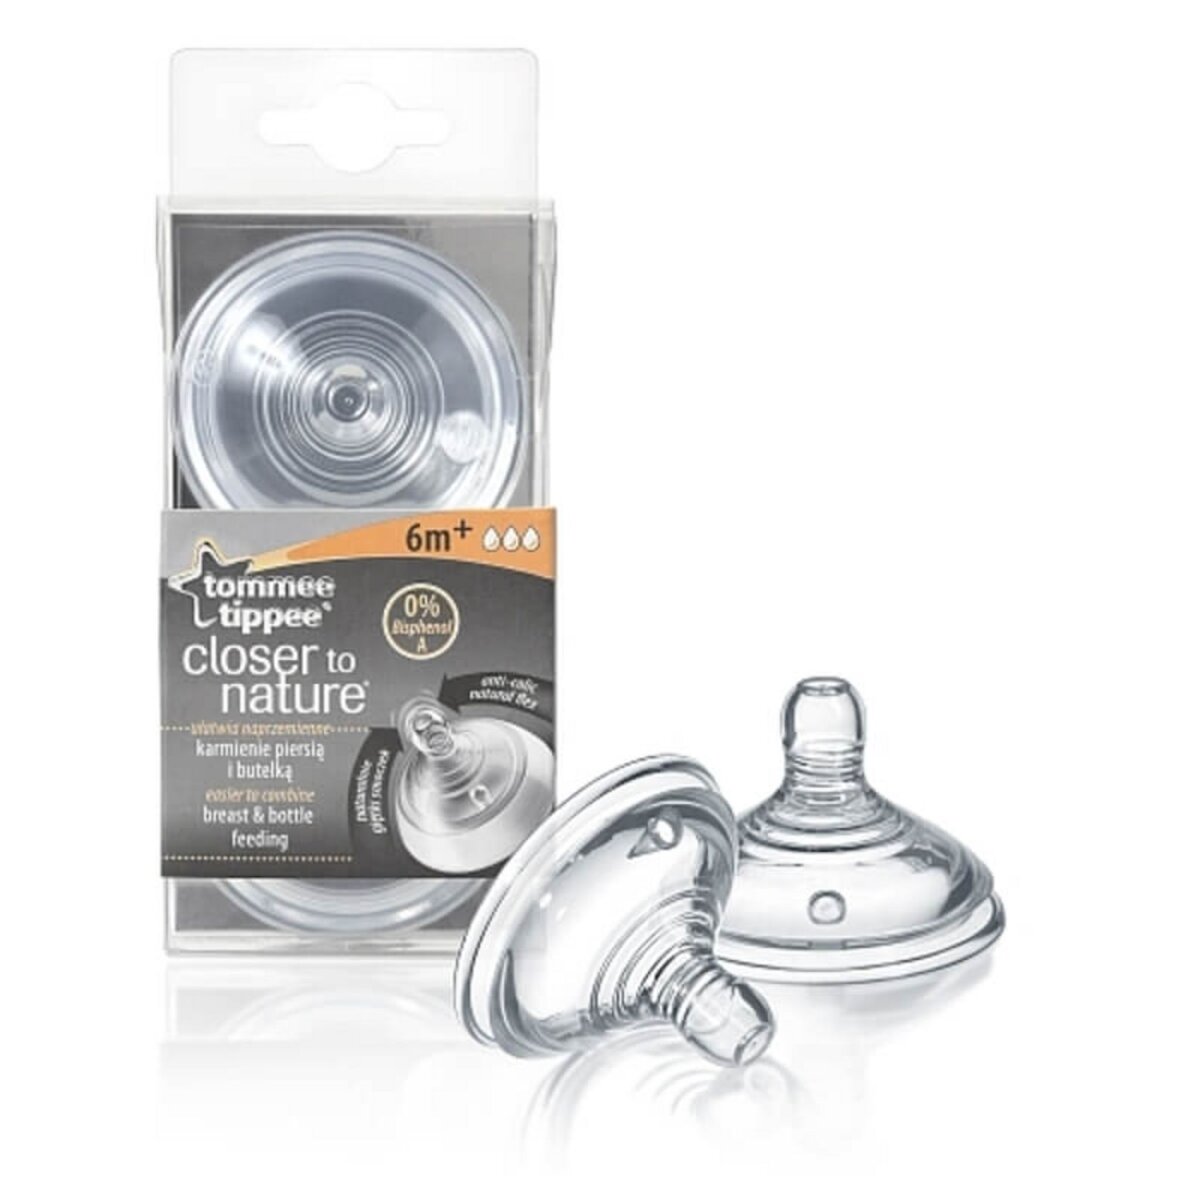 TOMMEE TIPPEE CLOSE TO NATURE 2 TETINES DEBIT RAPIDE 6M+